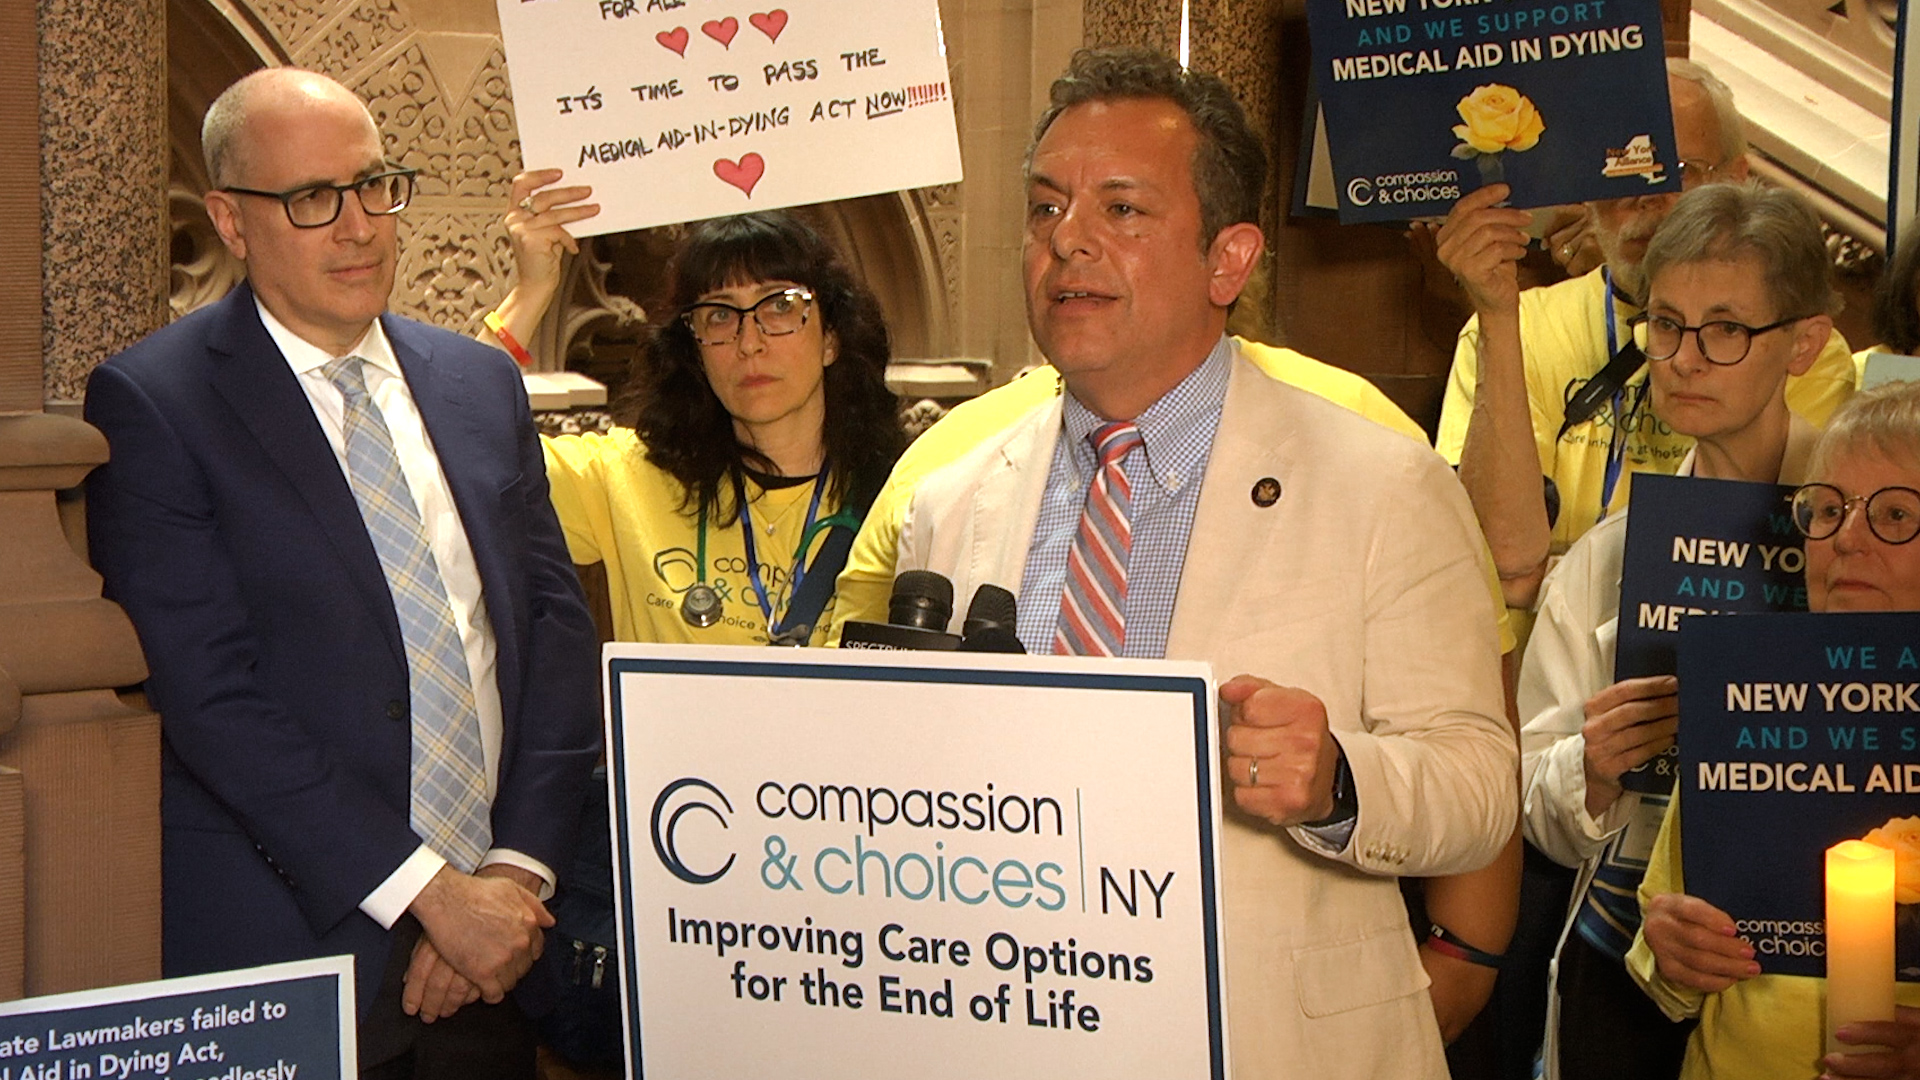 Simone Urges Passage of NY’s Medical Aid in Dying Act